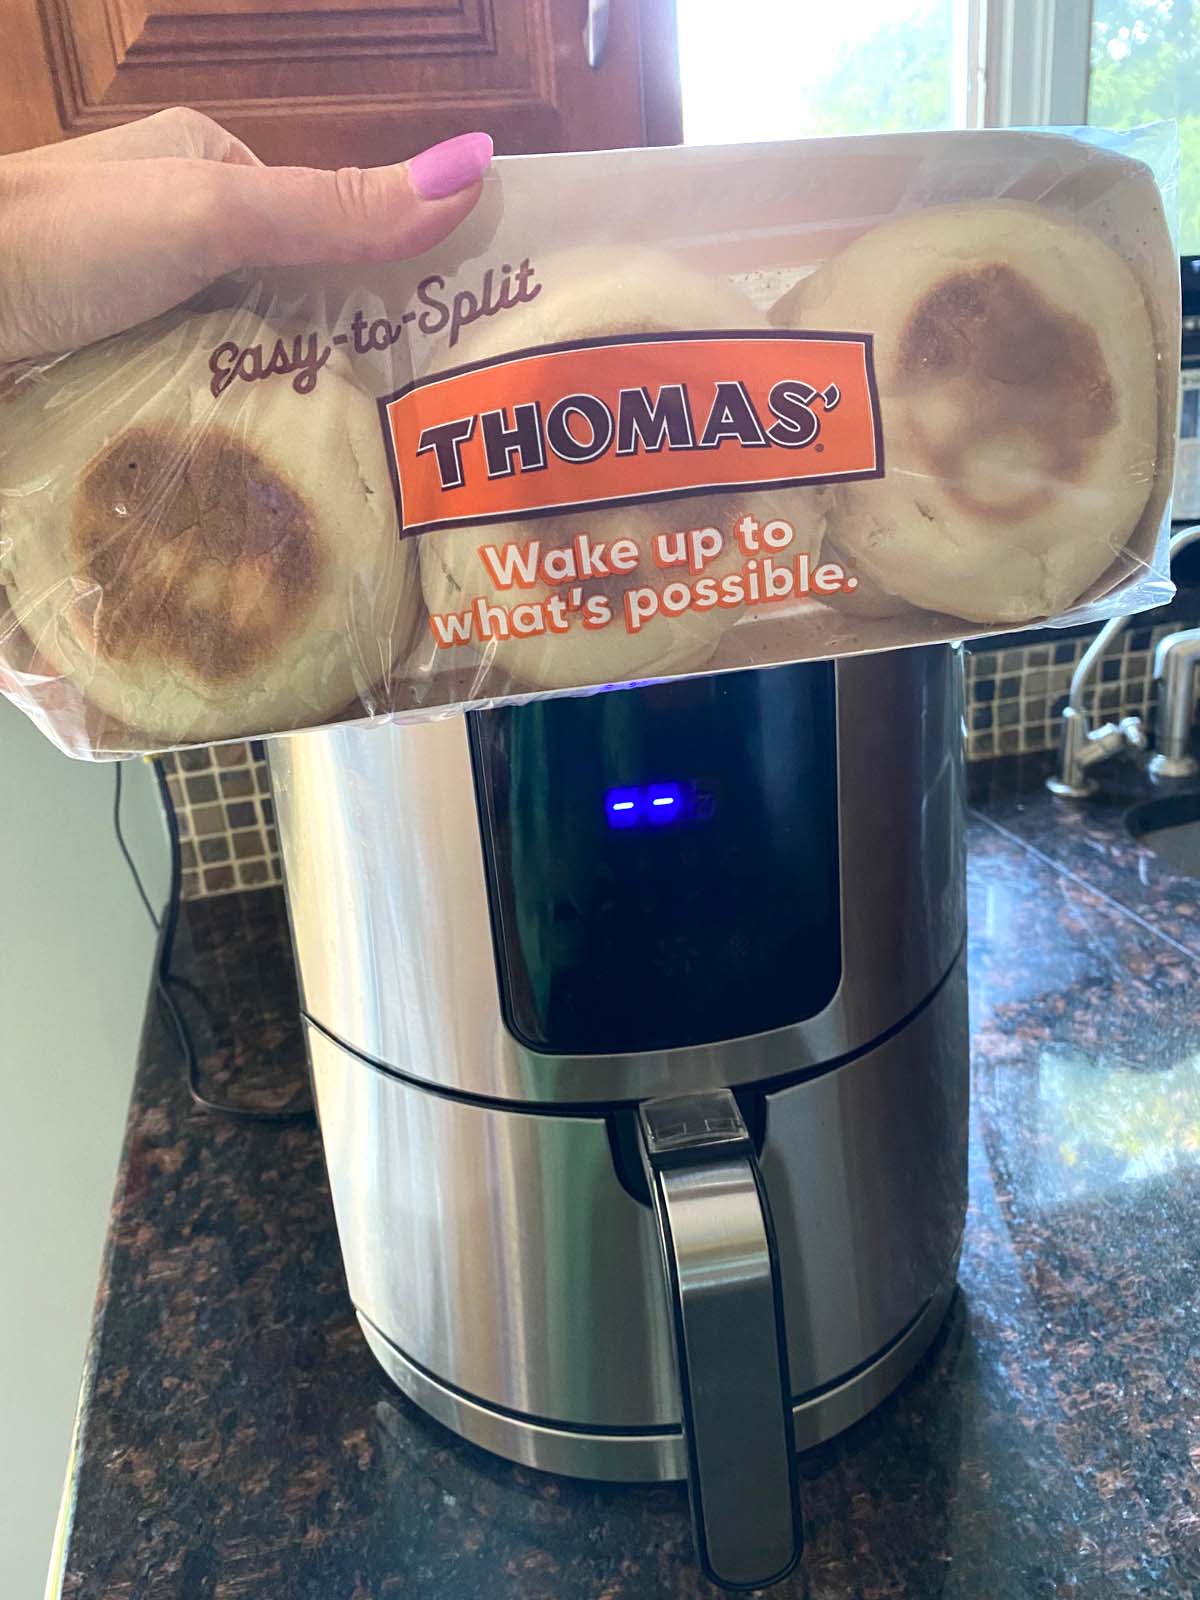 Package of english muffins in front of an air fryer.